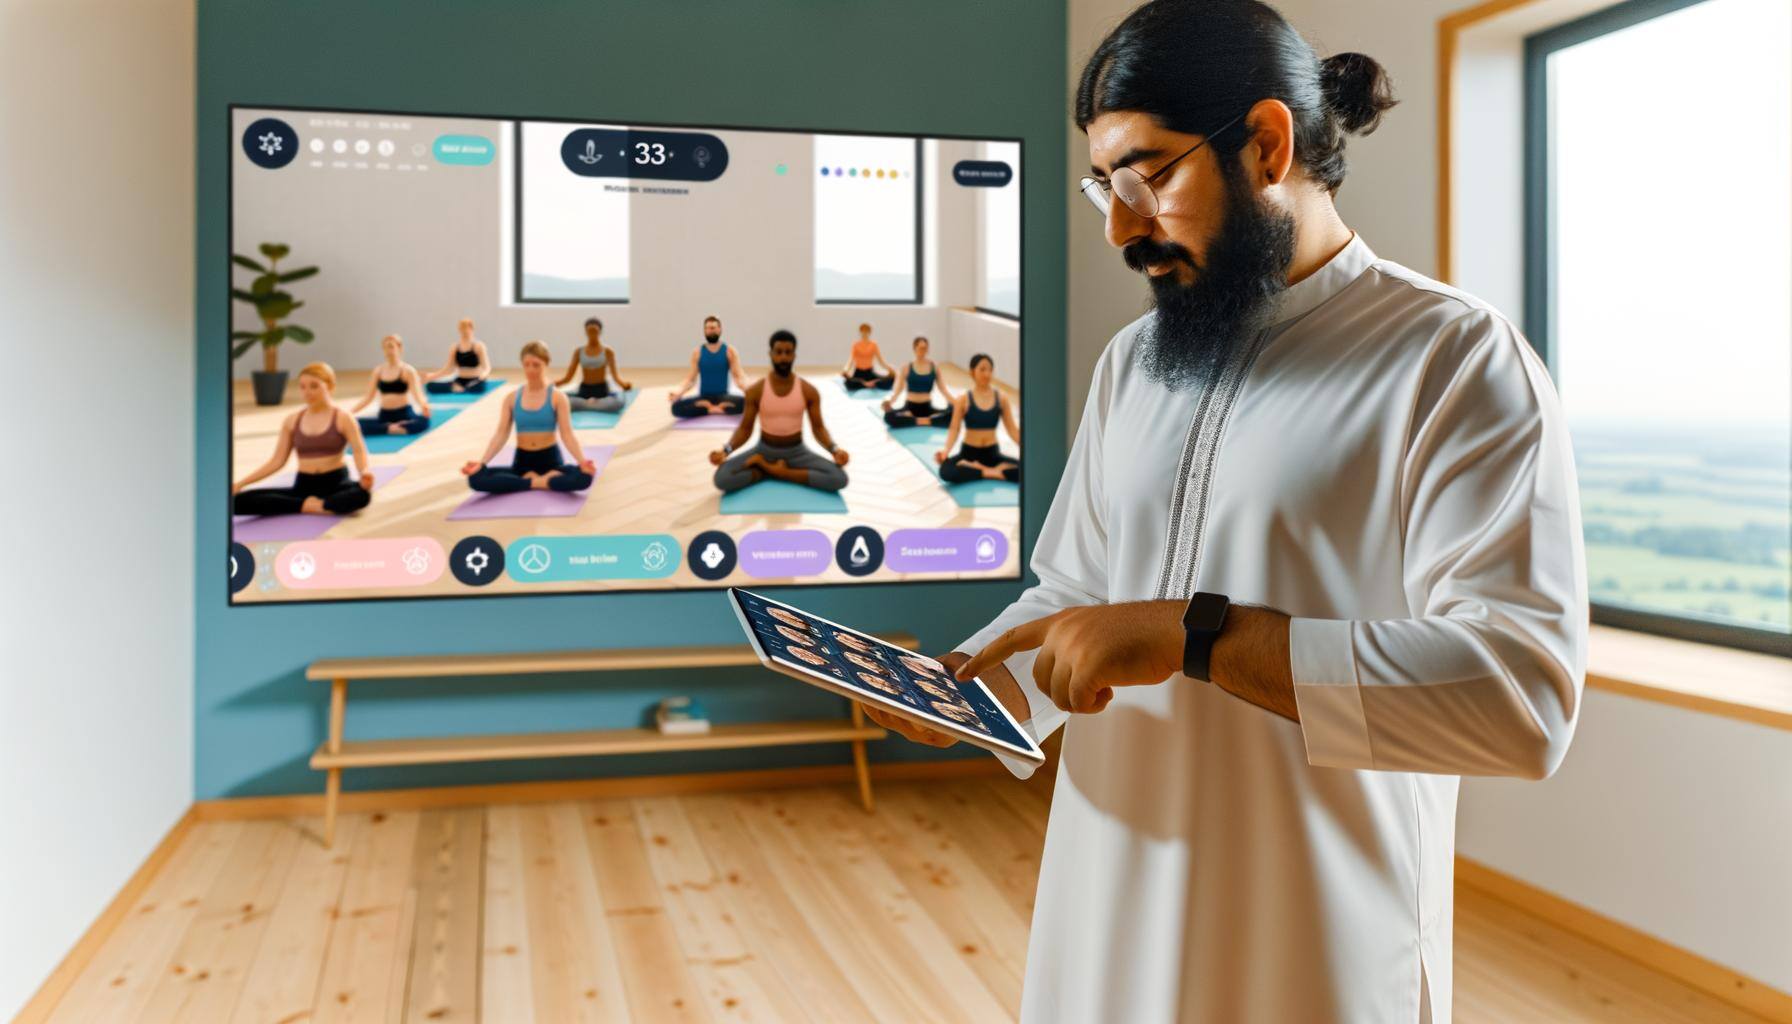 Male yoga teacher teaching an online yoga class, the students are visible on a screen